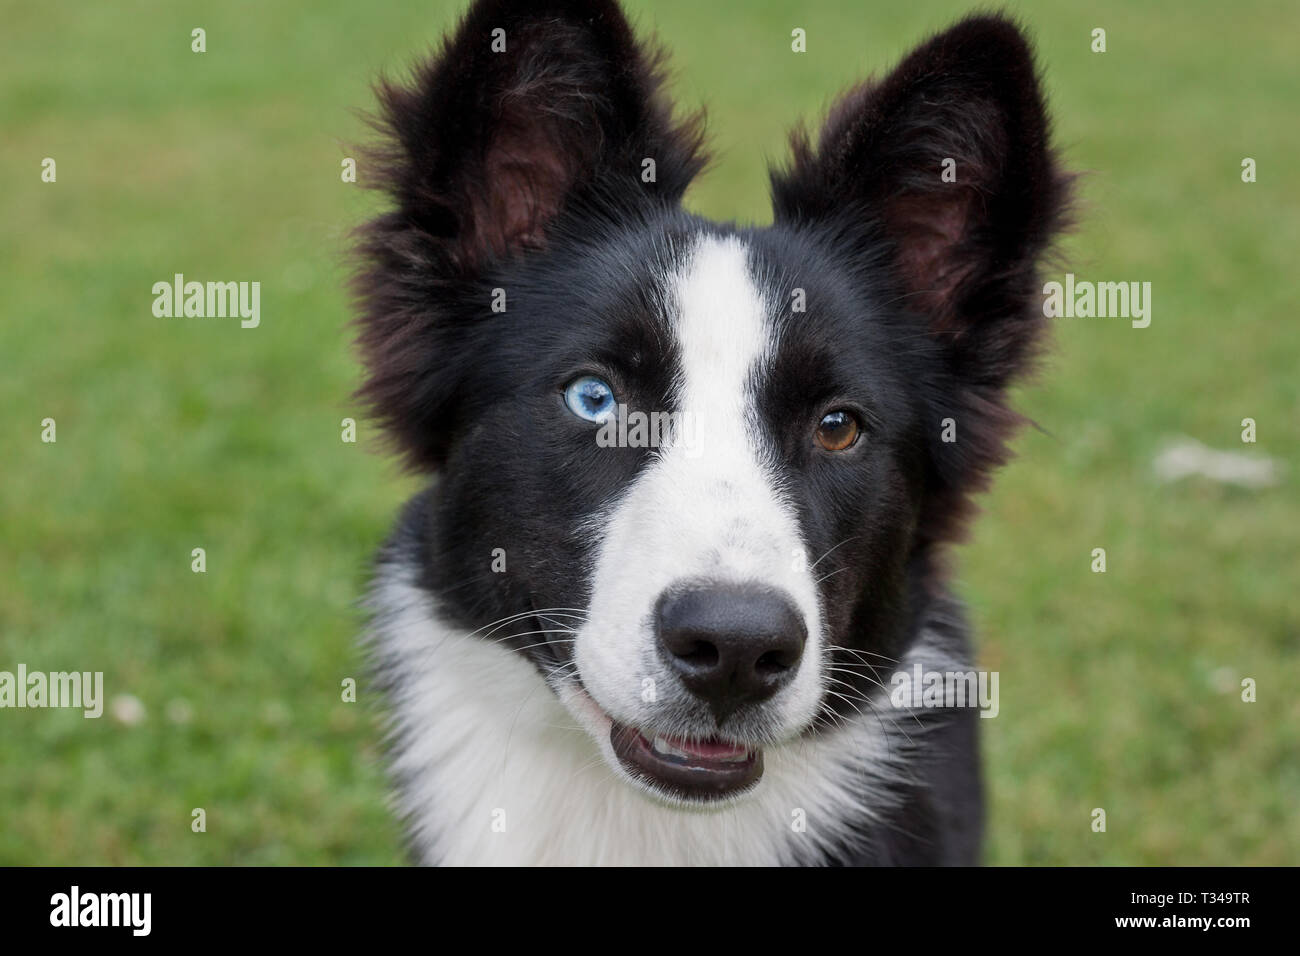 Portrait Of Cute Yakutian Laika Puppy With Different Eyes Close Up Pet Animals Purebred Dog Stock Photo Alamy